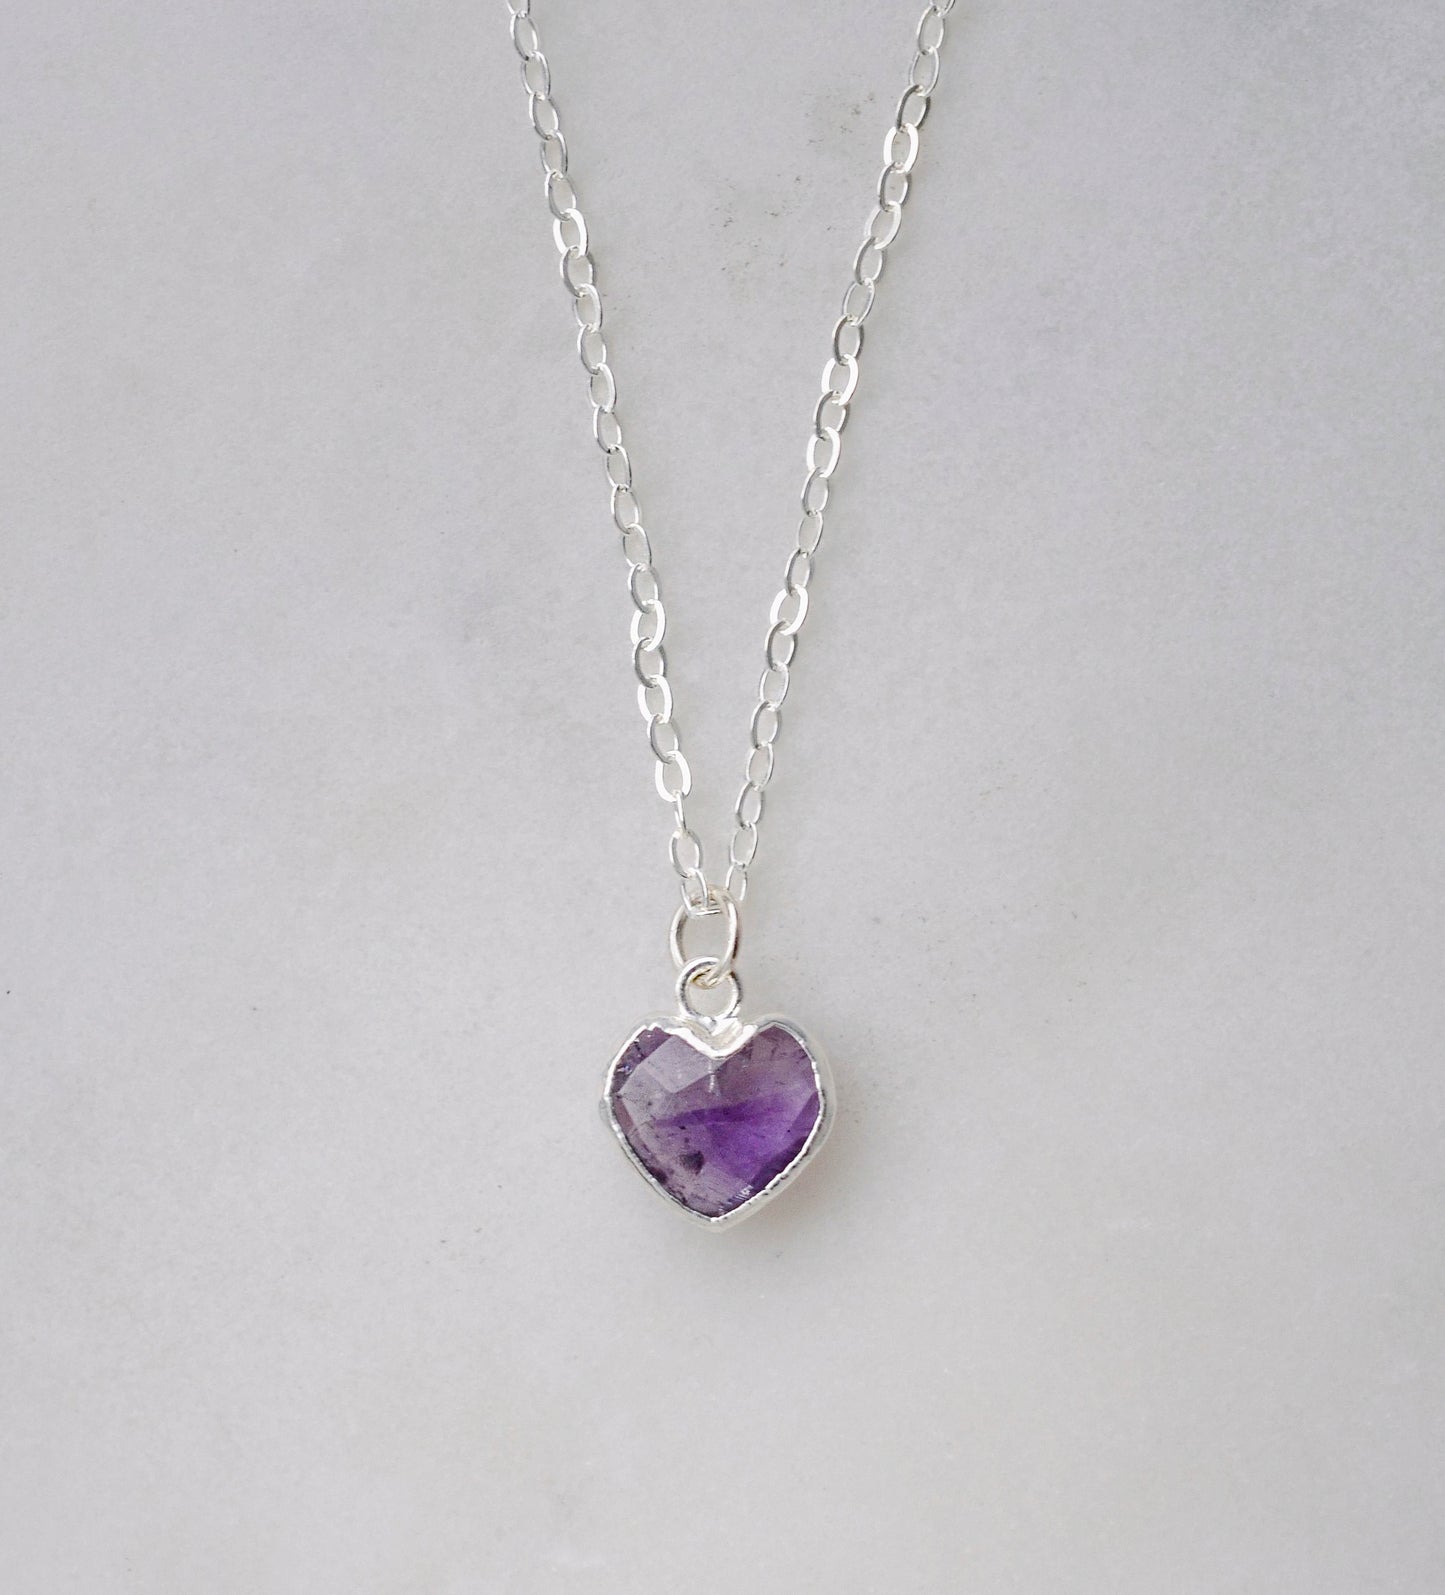 Purple heart shaped Amethyst pendant suspended from a sterling silver chain. 